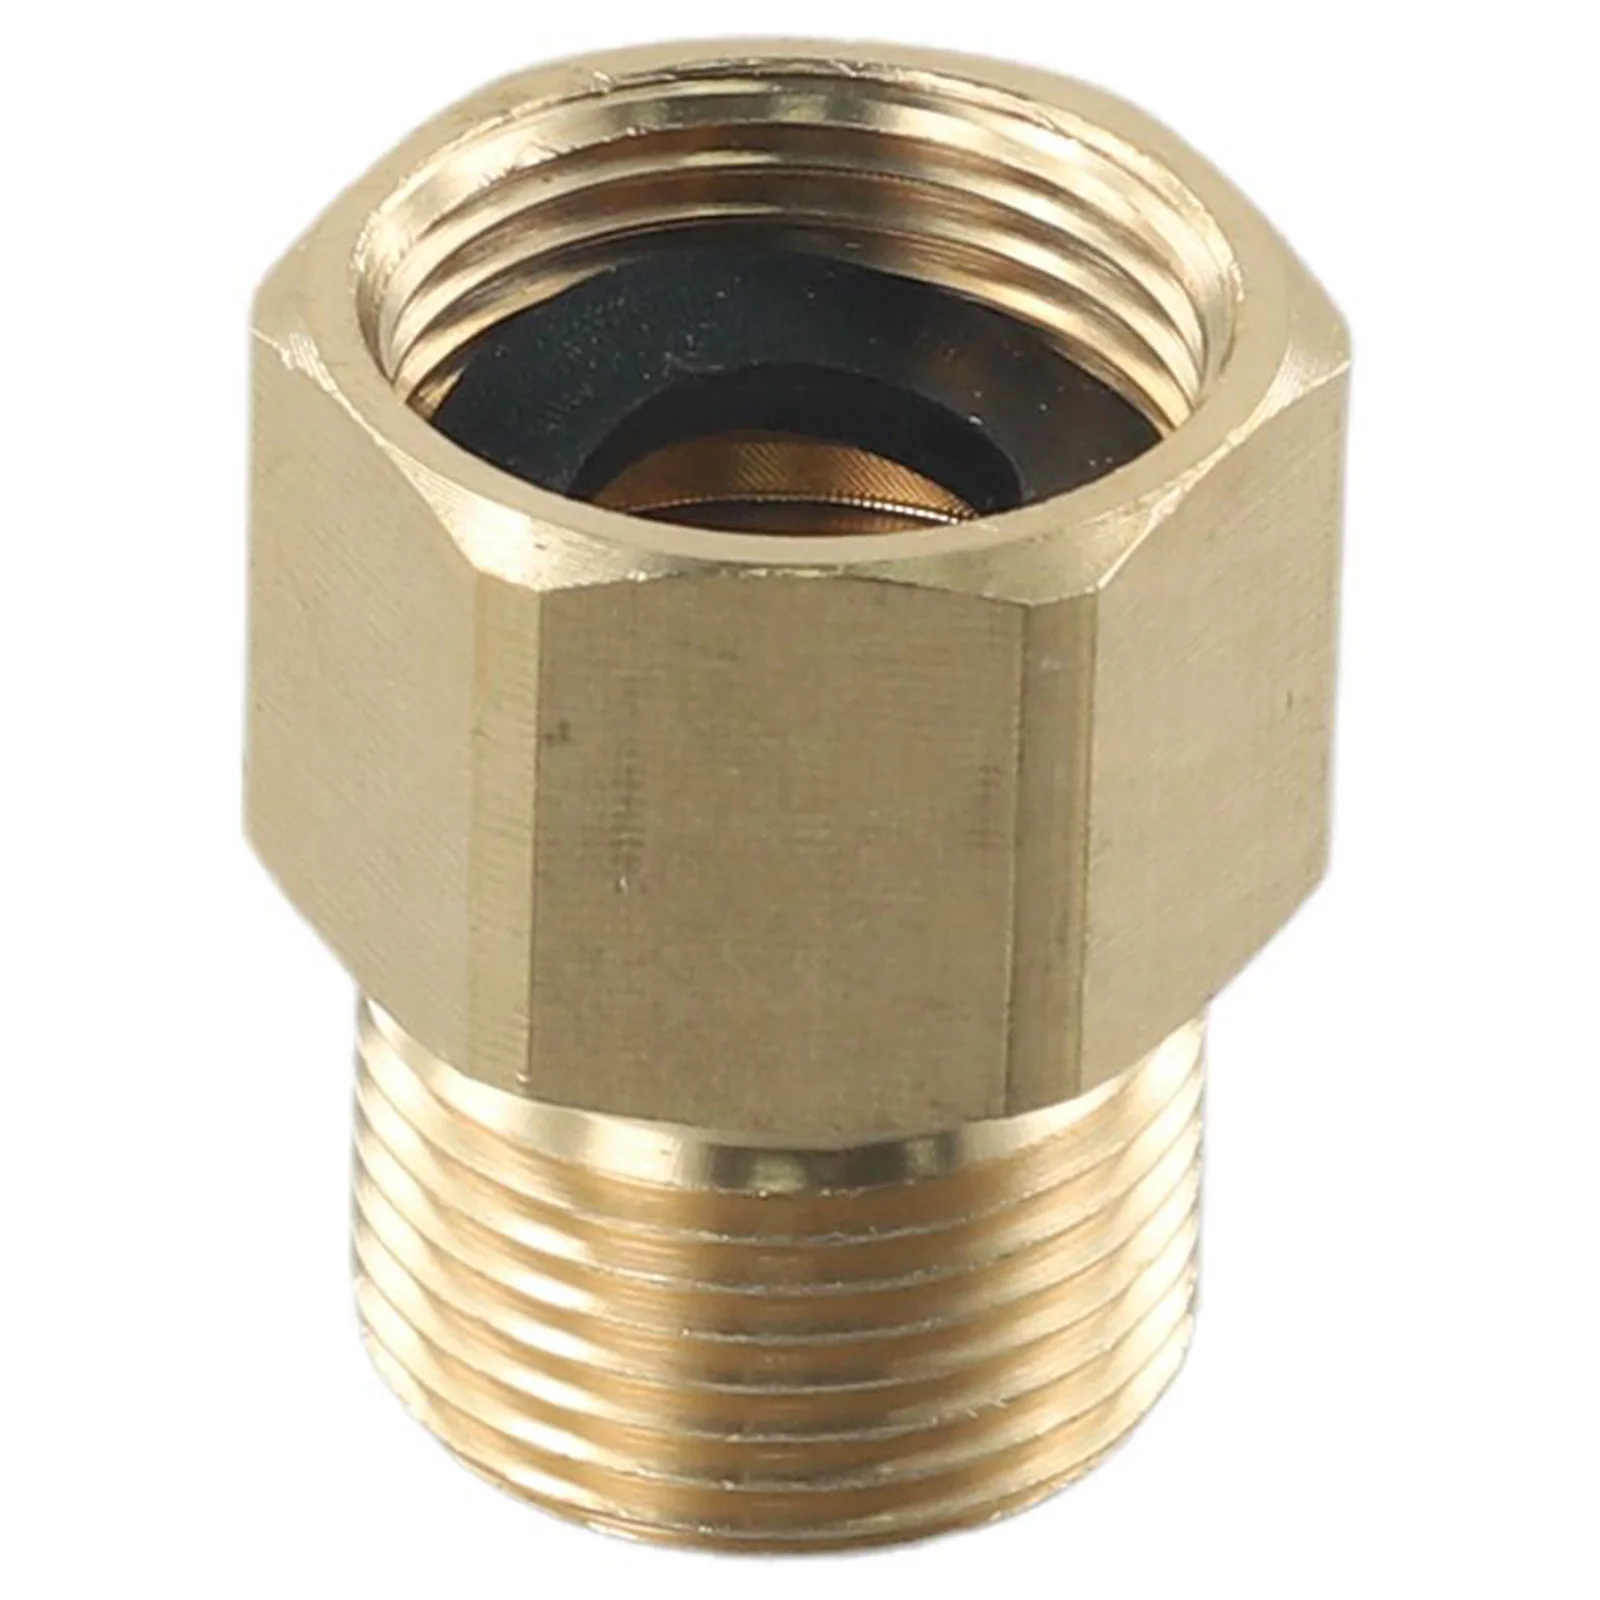 

2232 High Pressure Cleaner Car Washer Fitting Adapter M22 15mm Male Thread To M22 14mm Female Metric Adapter For Pressure Washer